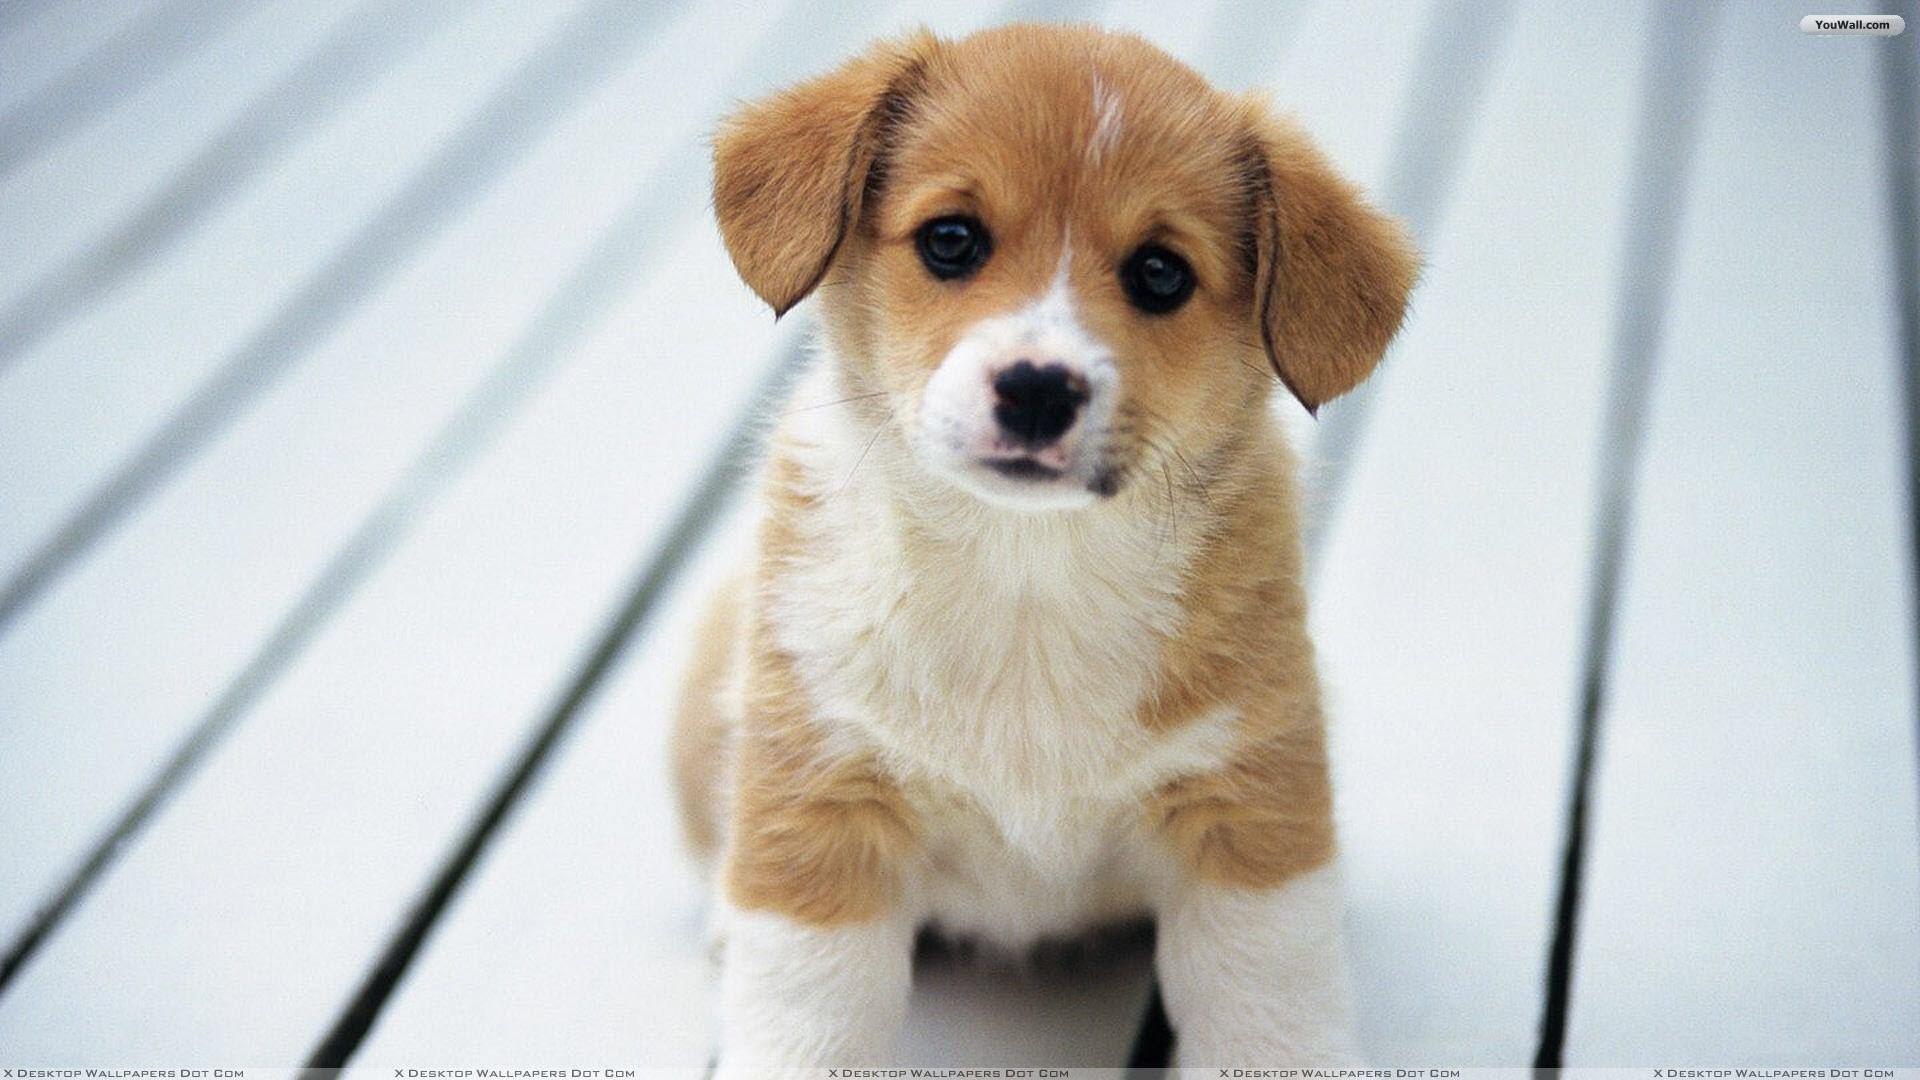 Puppy Wallpaper for Computer